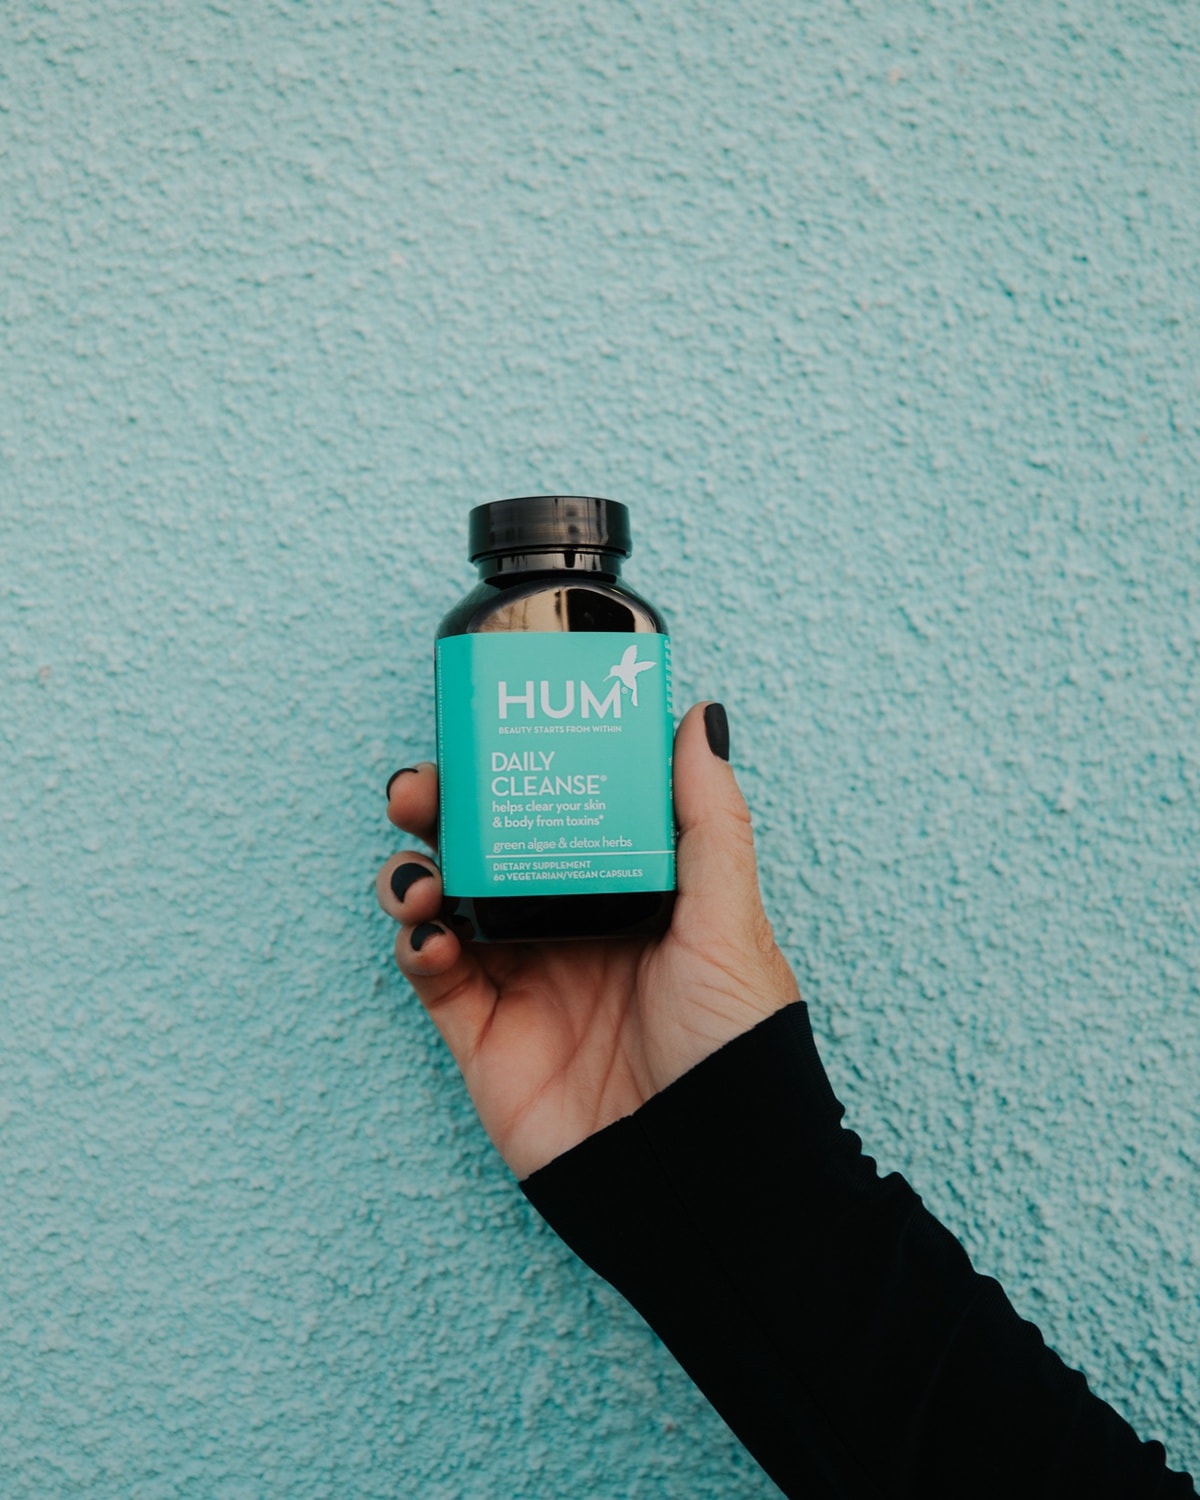 HUM daily cleanse